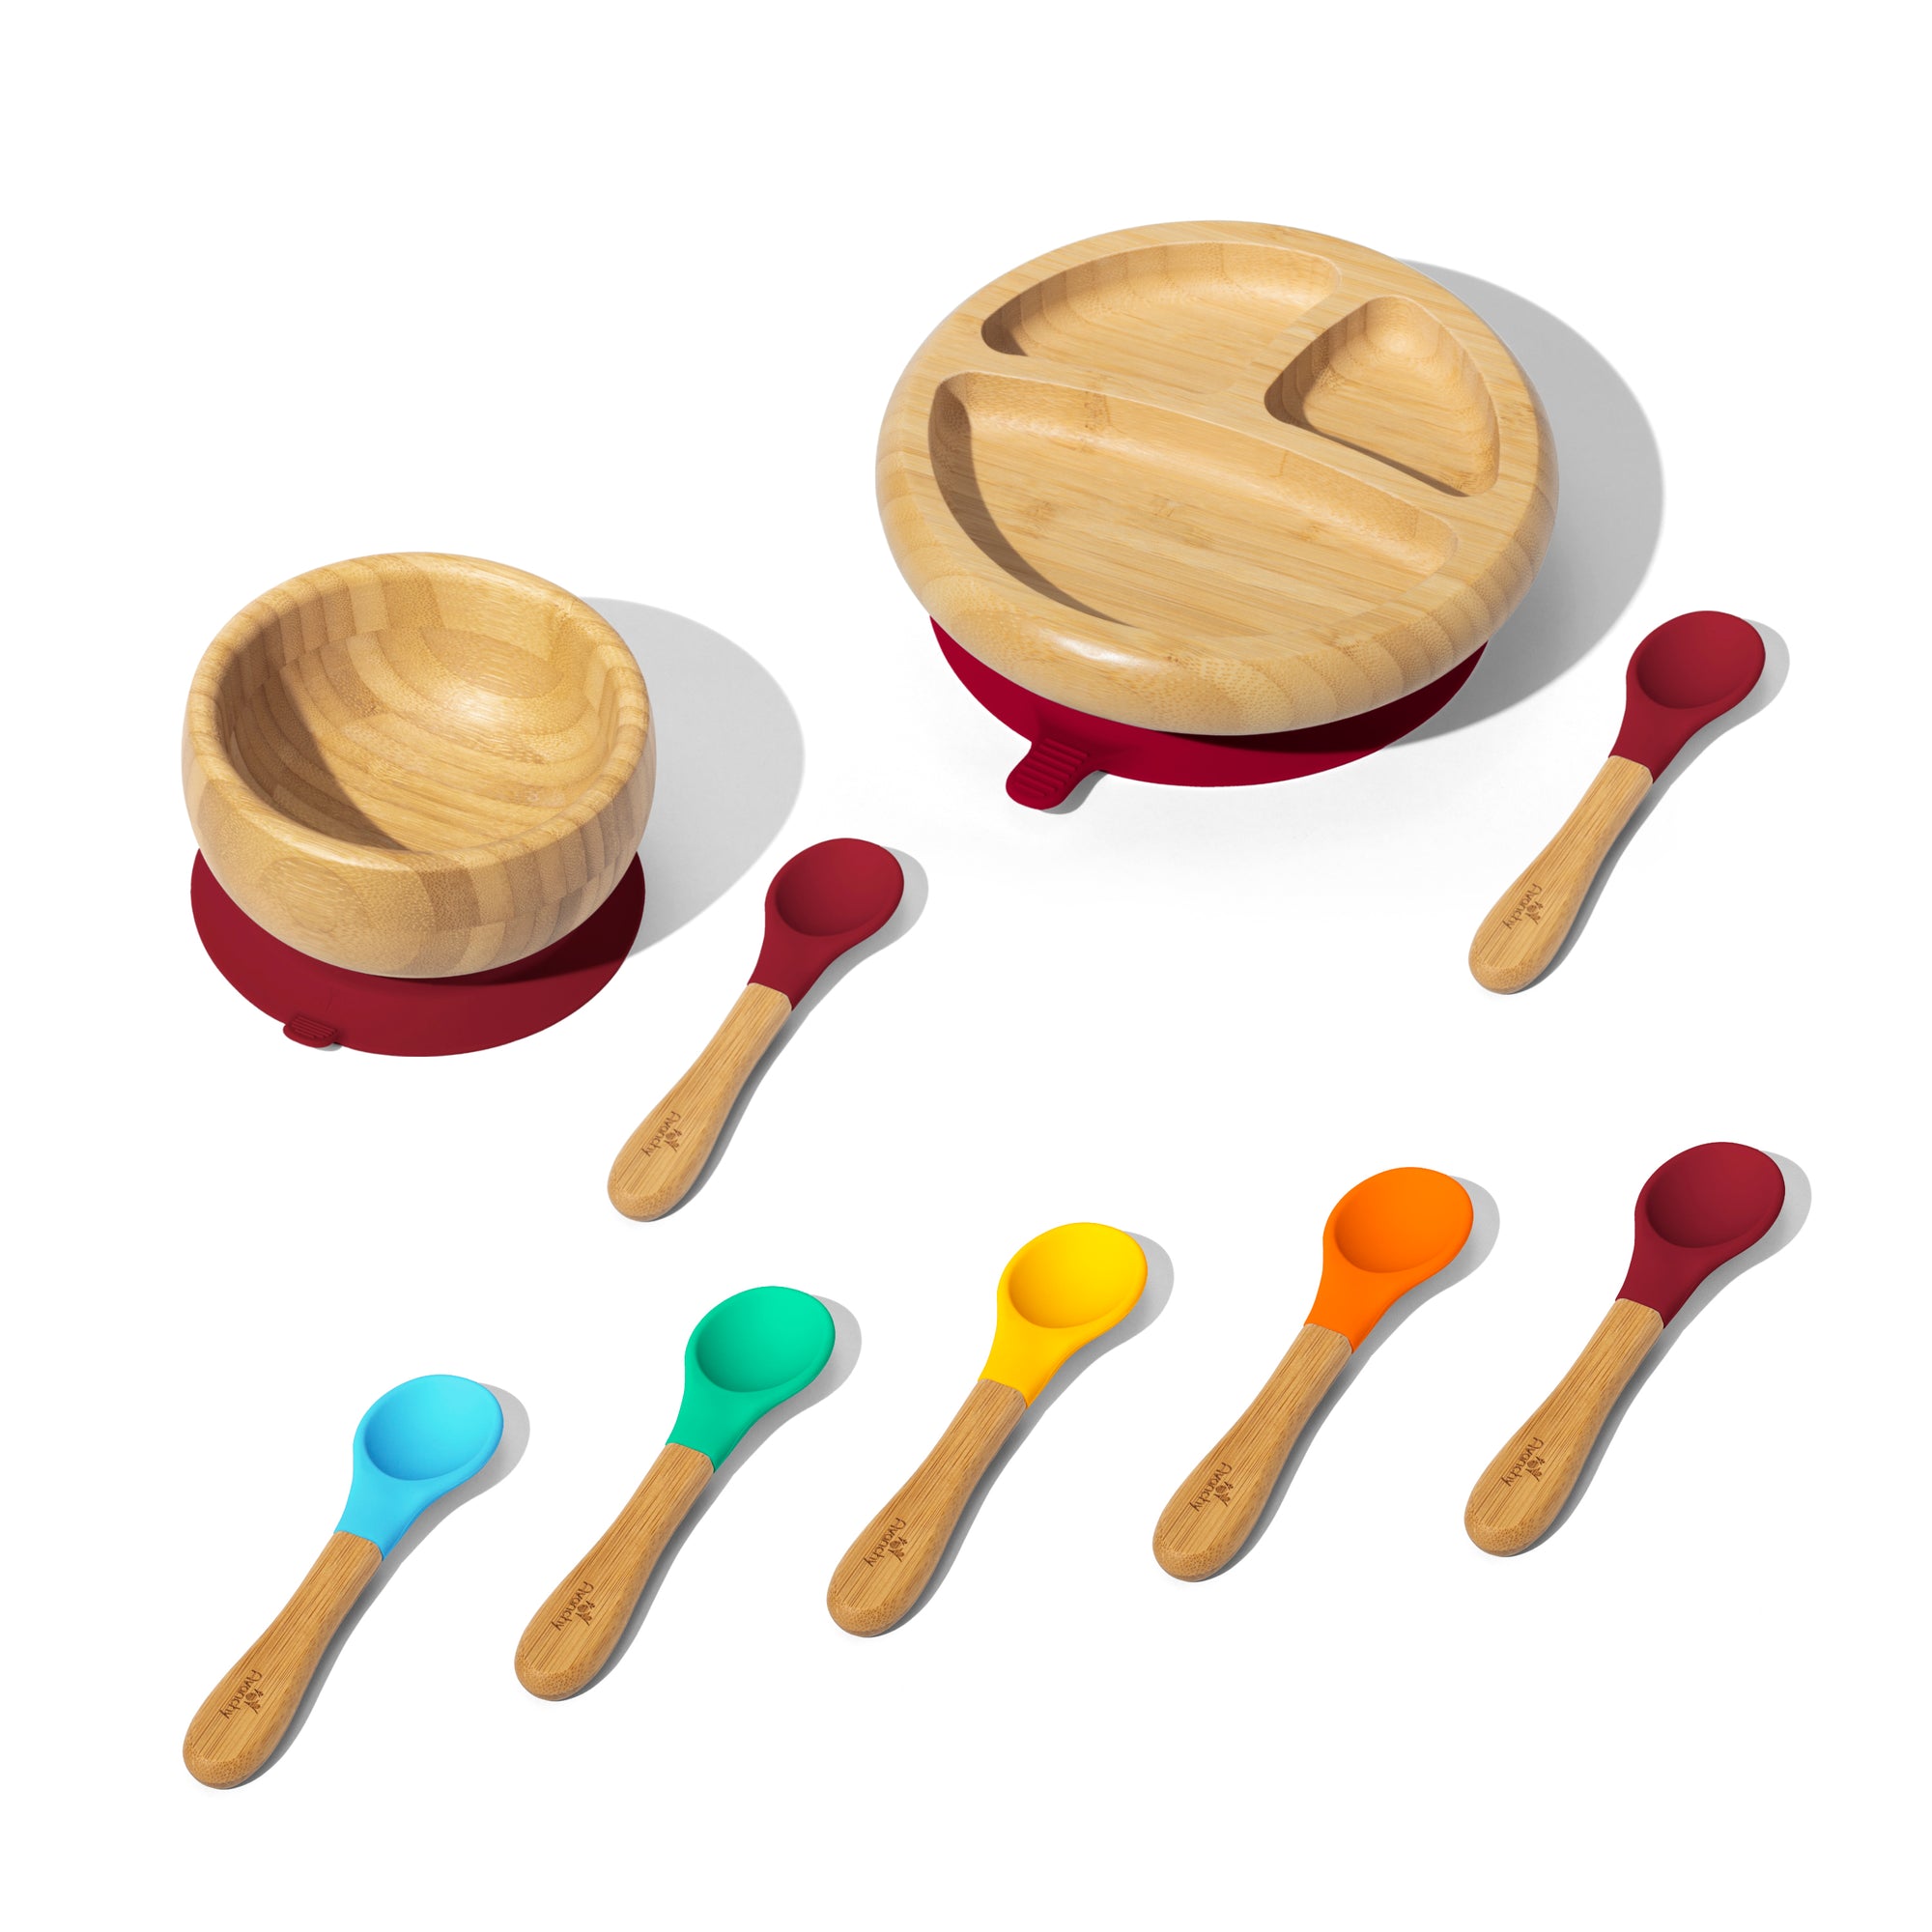 Build-A-Rainbow Gift Set - Avanchy Sustainable Baby Dishware